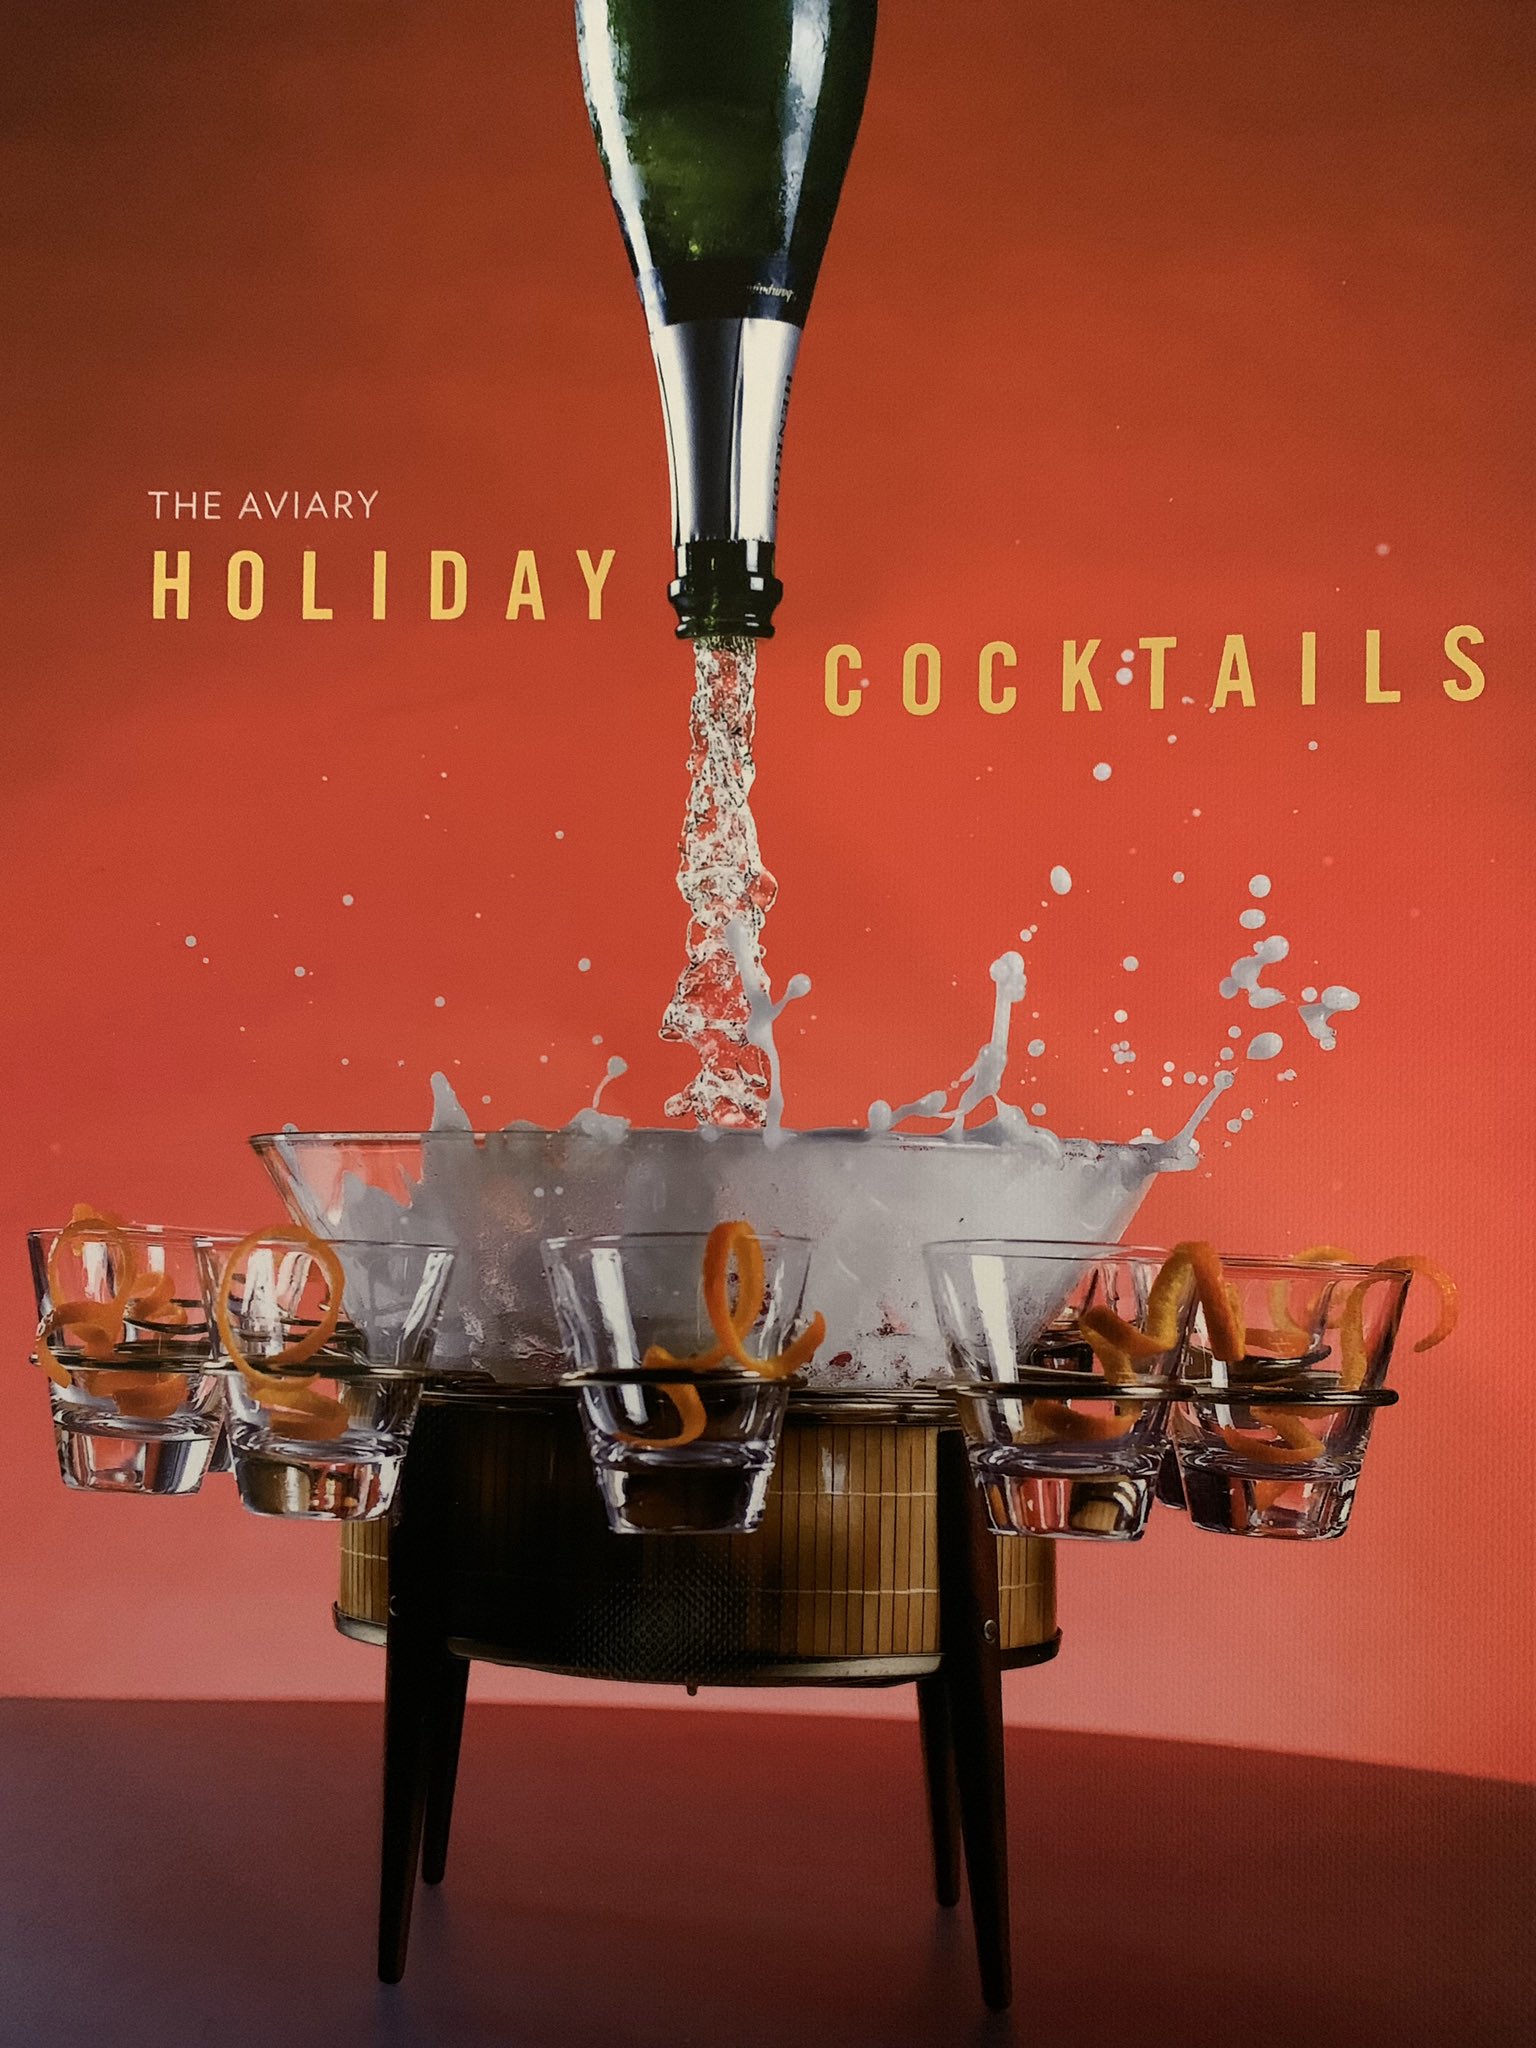 The Aviary: Holiday Cocktails